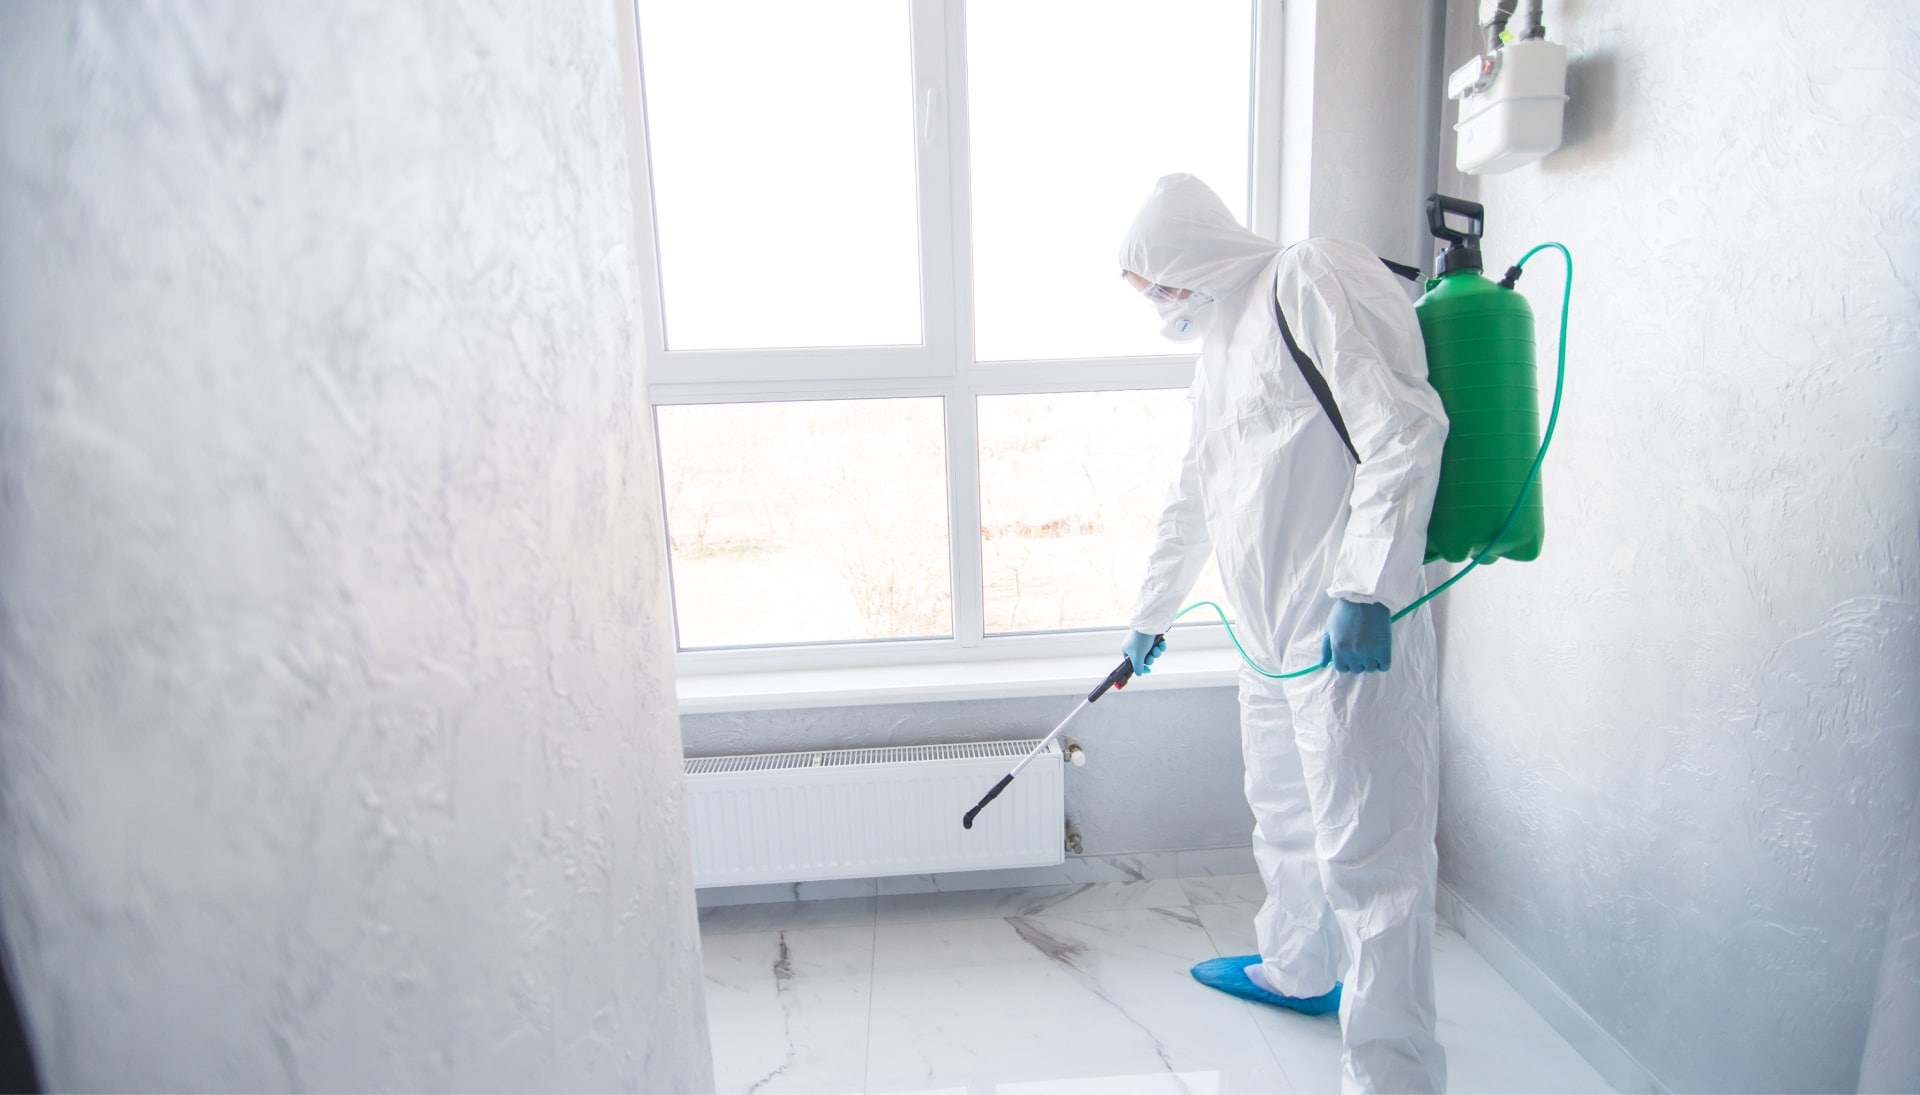 We provide the highest-quality mold inspection, testing, and removal services in the Orange County, California area.